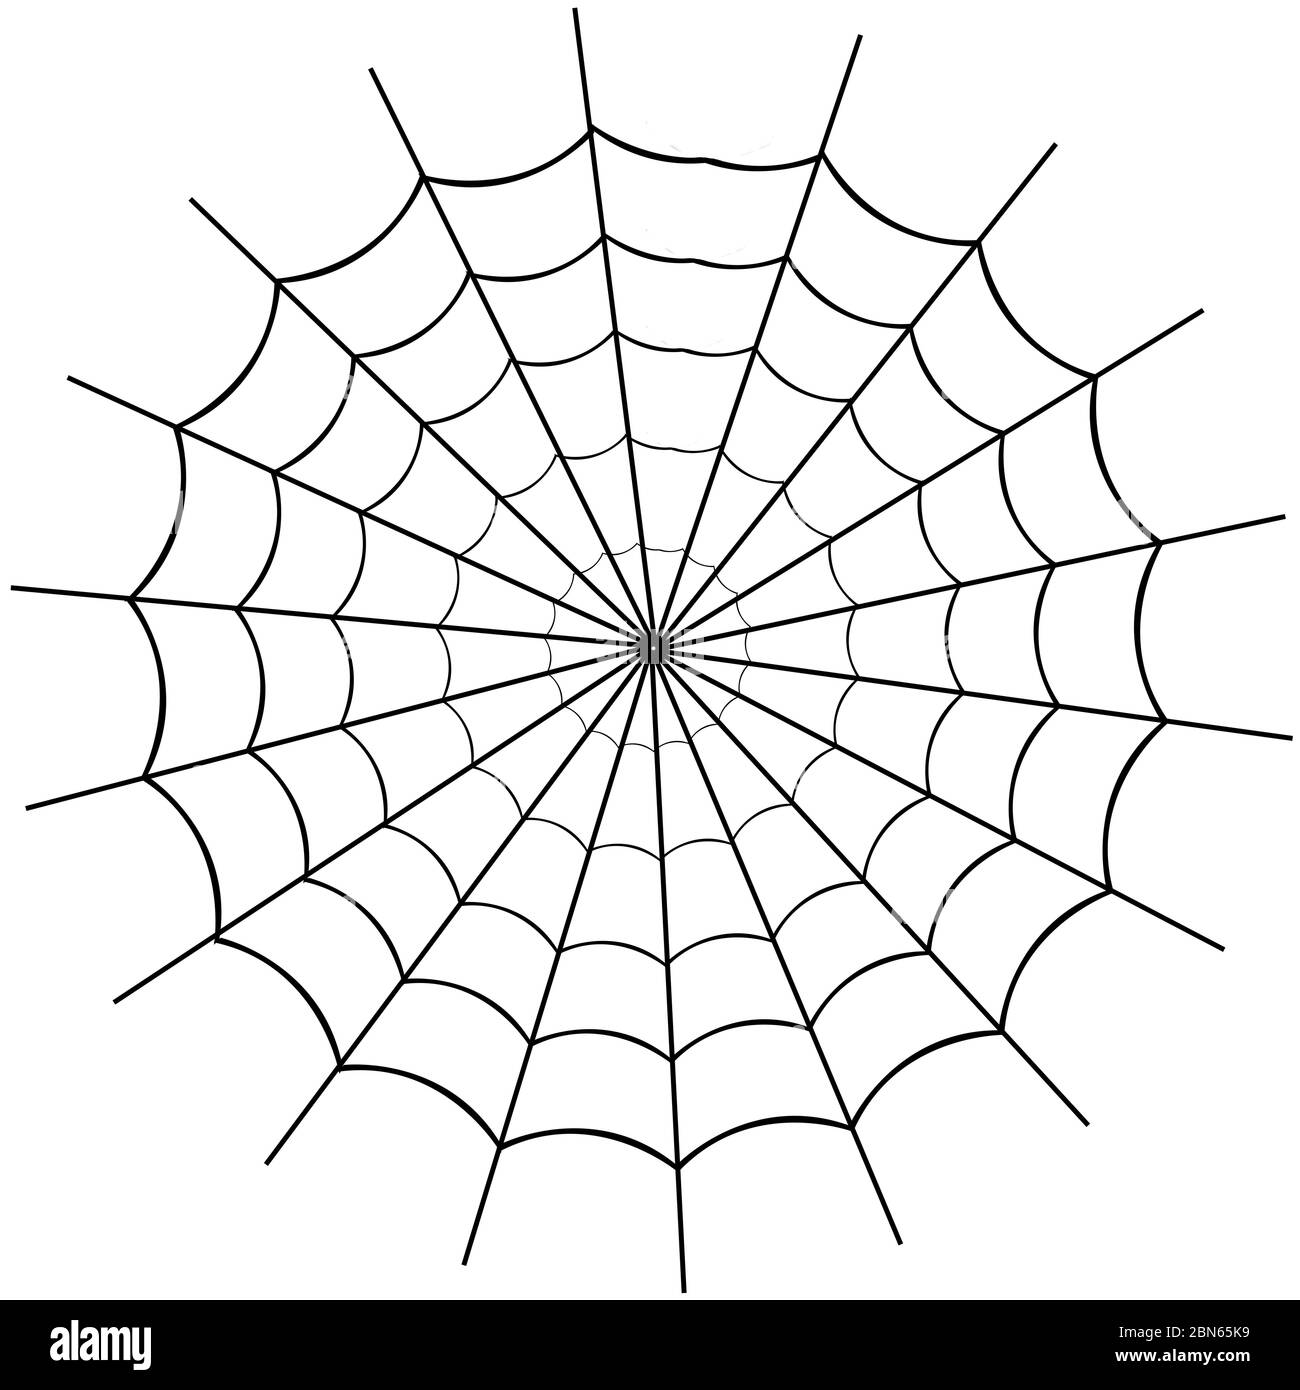 silhouette of spider web on white background Stock Photo